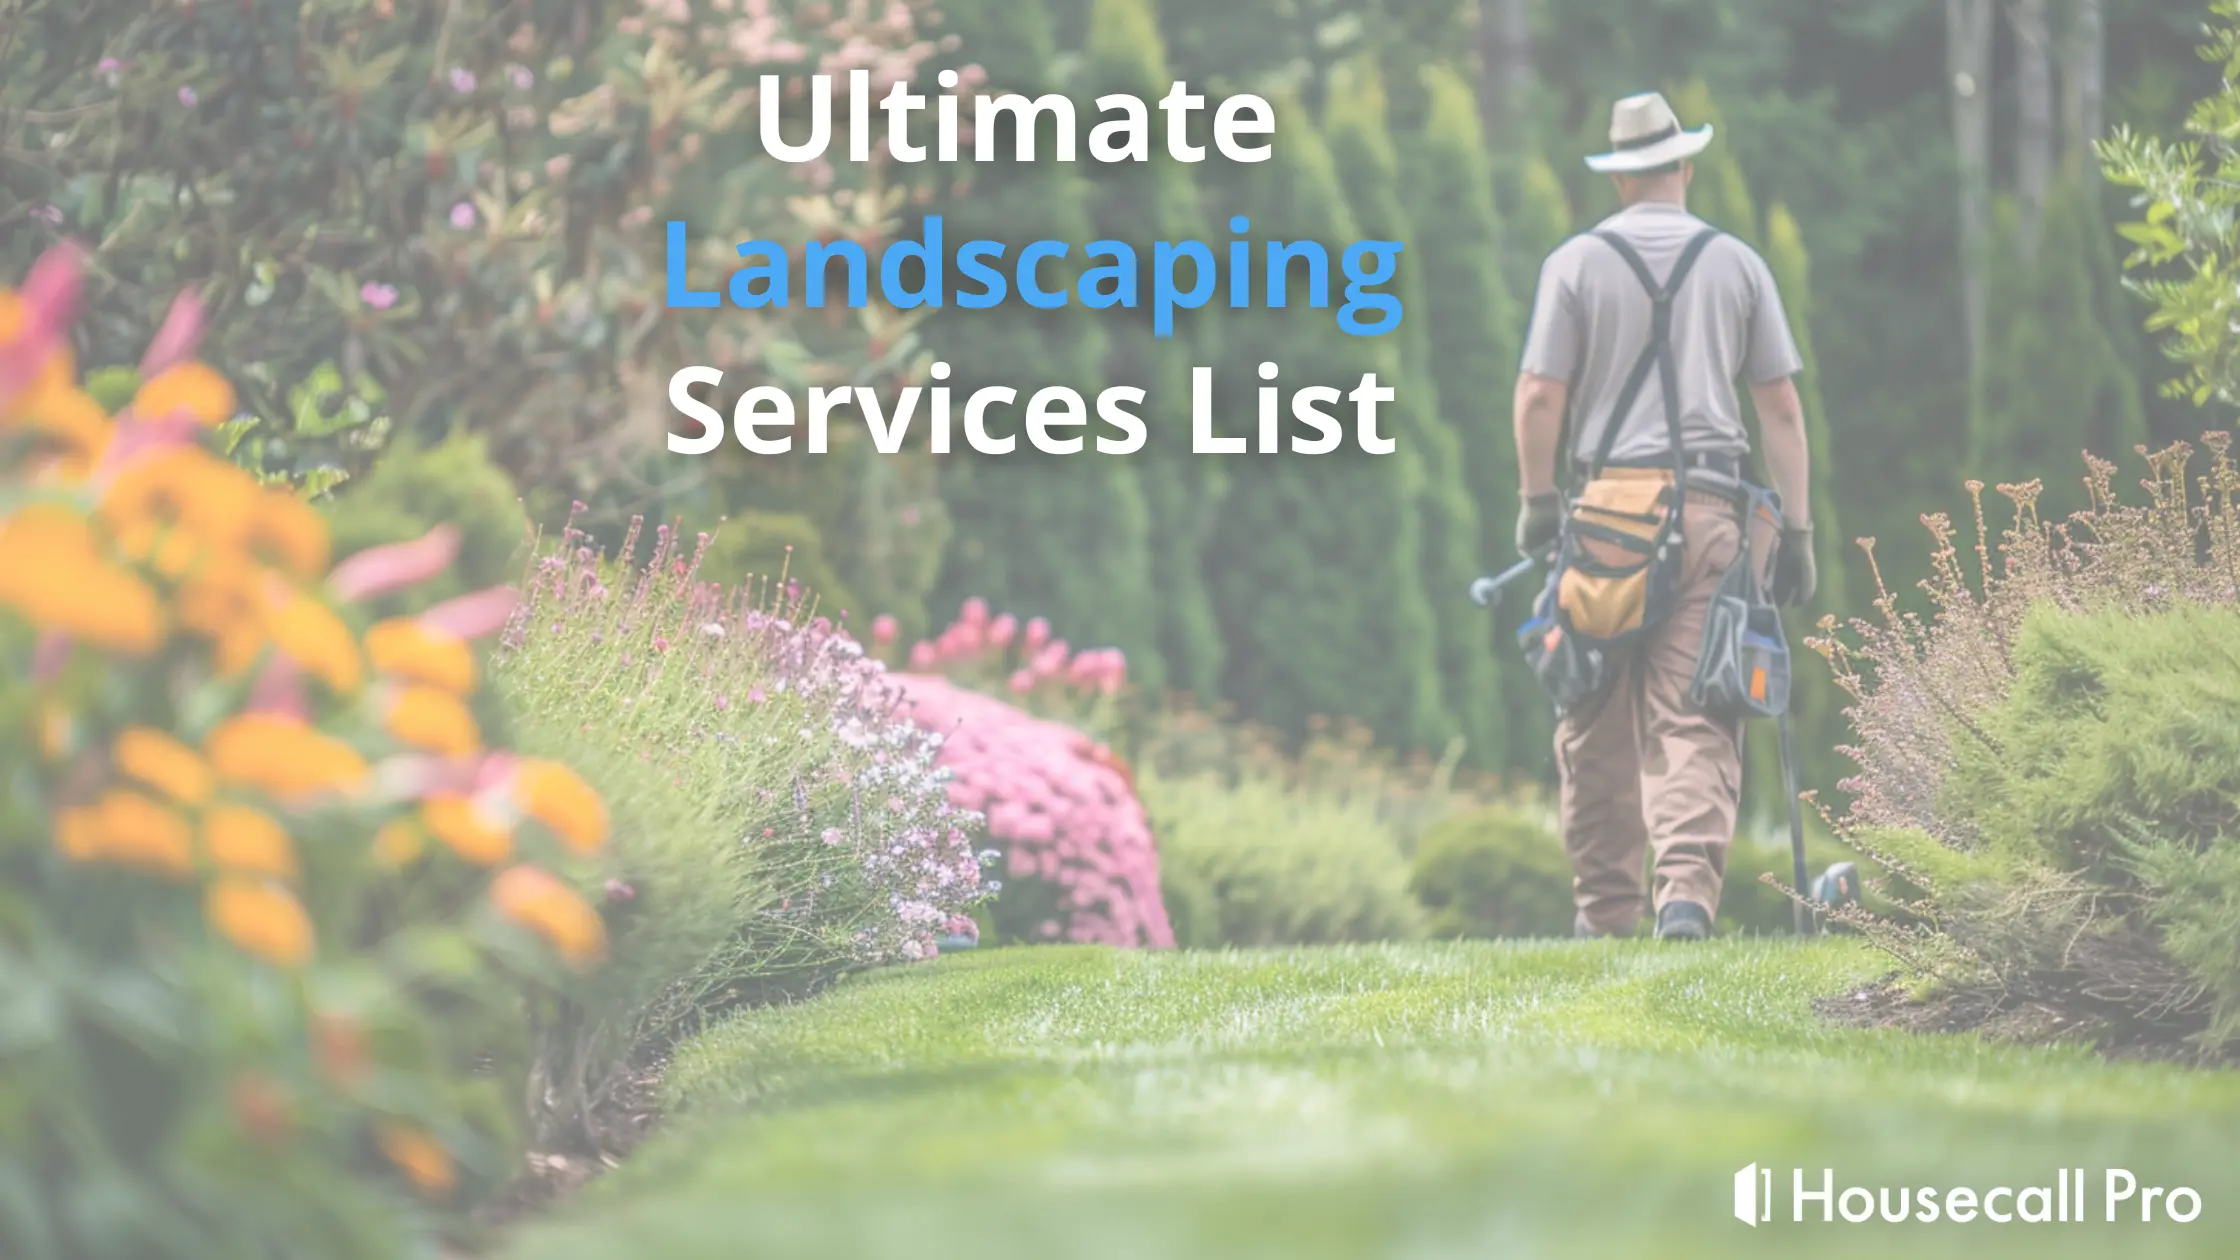 Ultimate Landscaping Services List